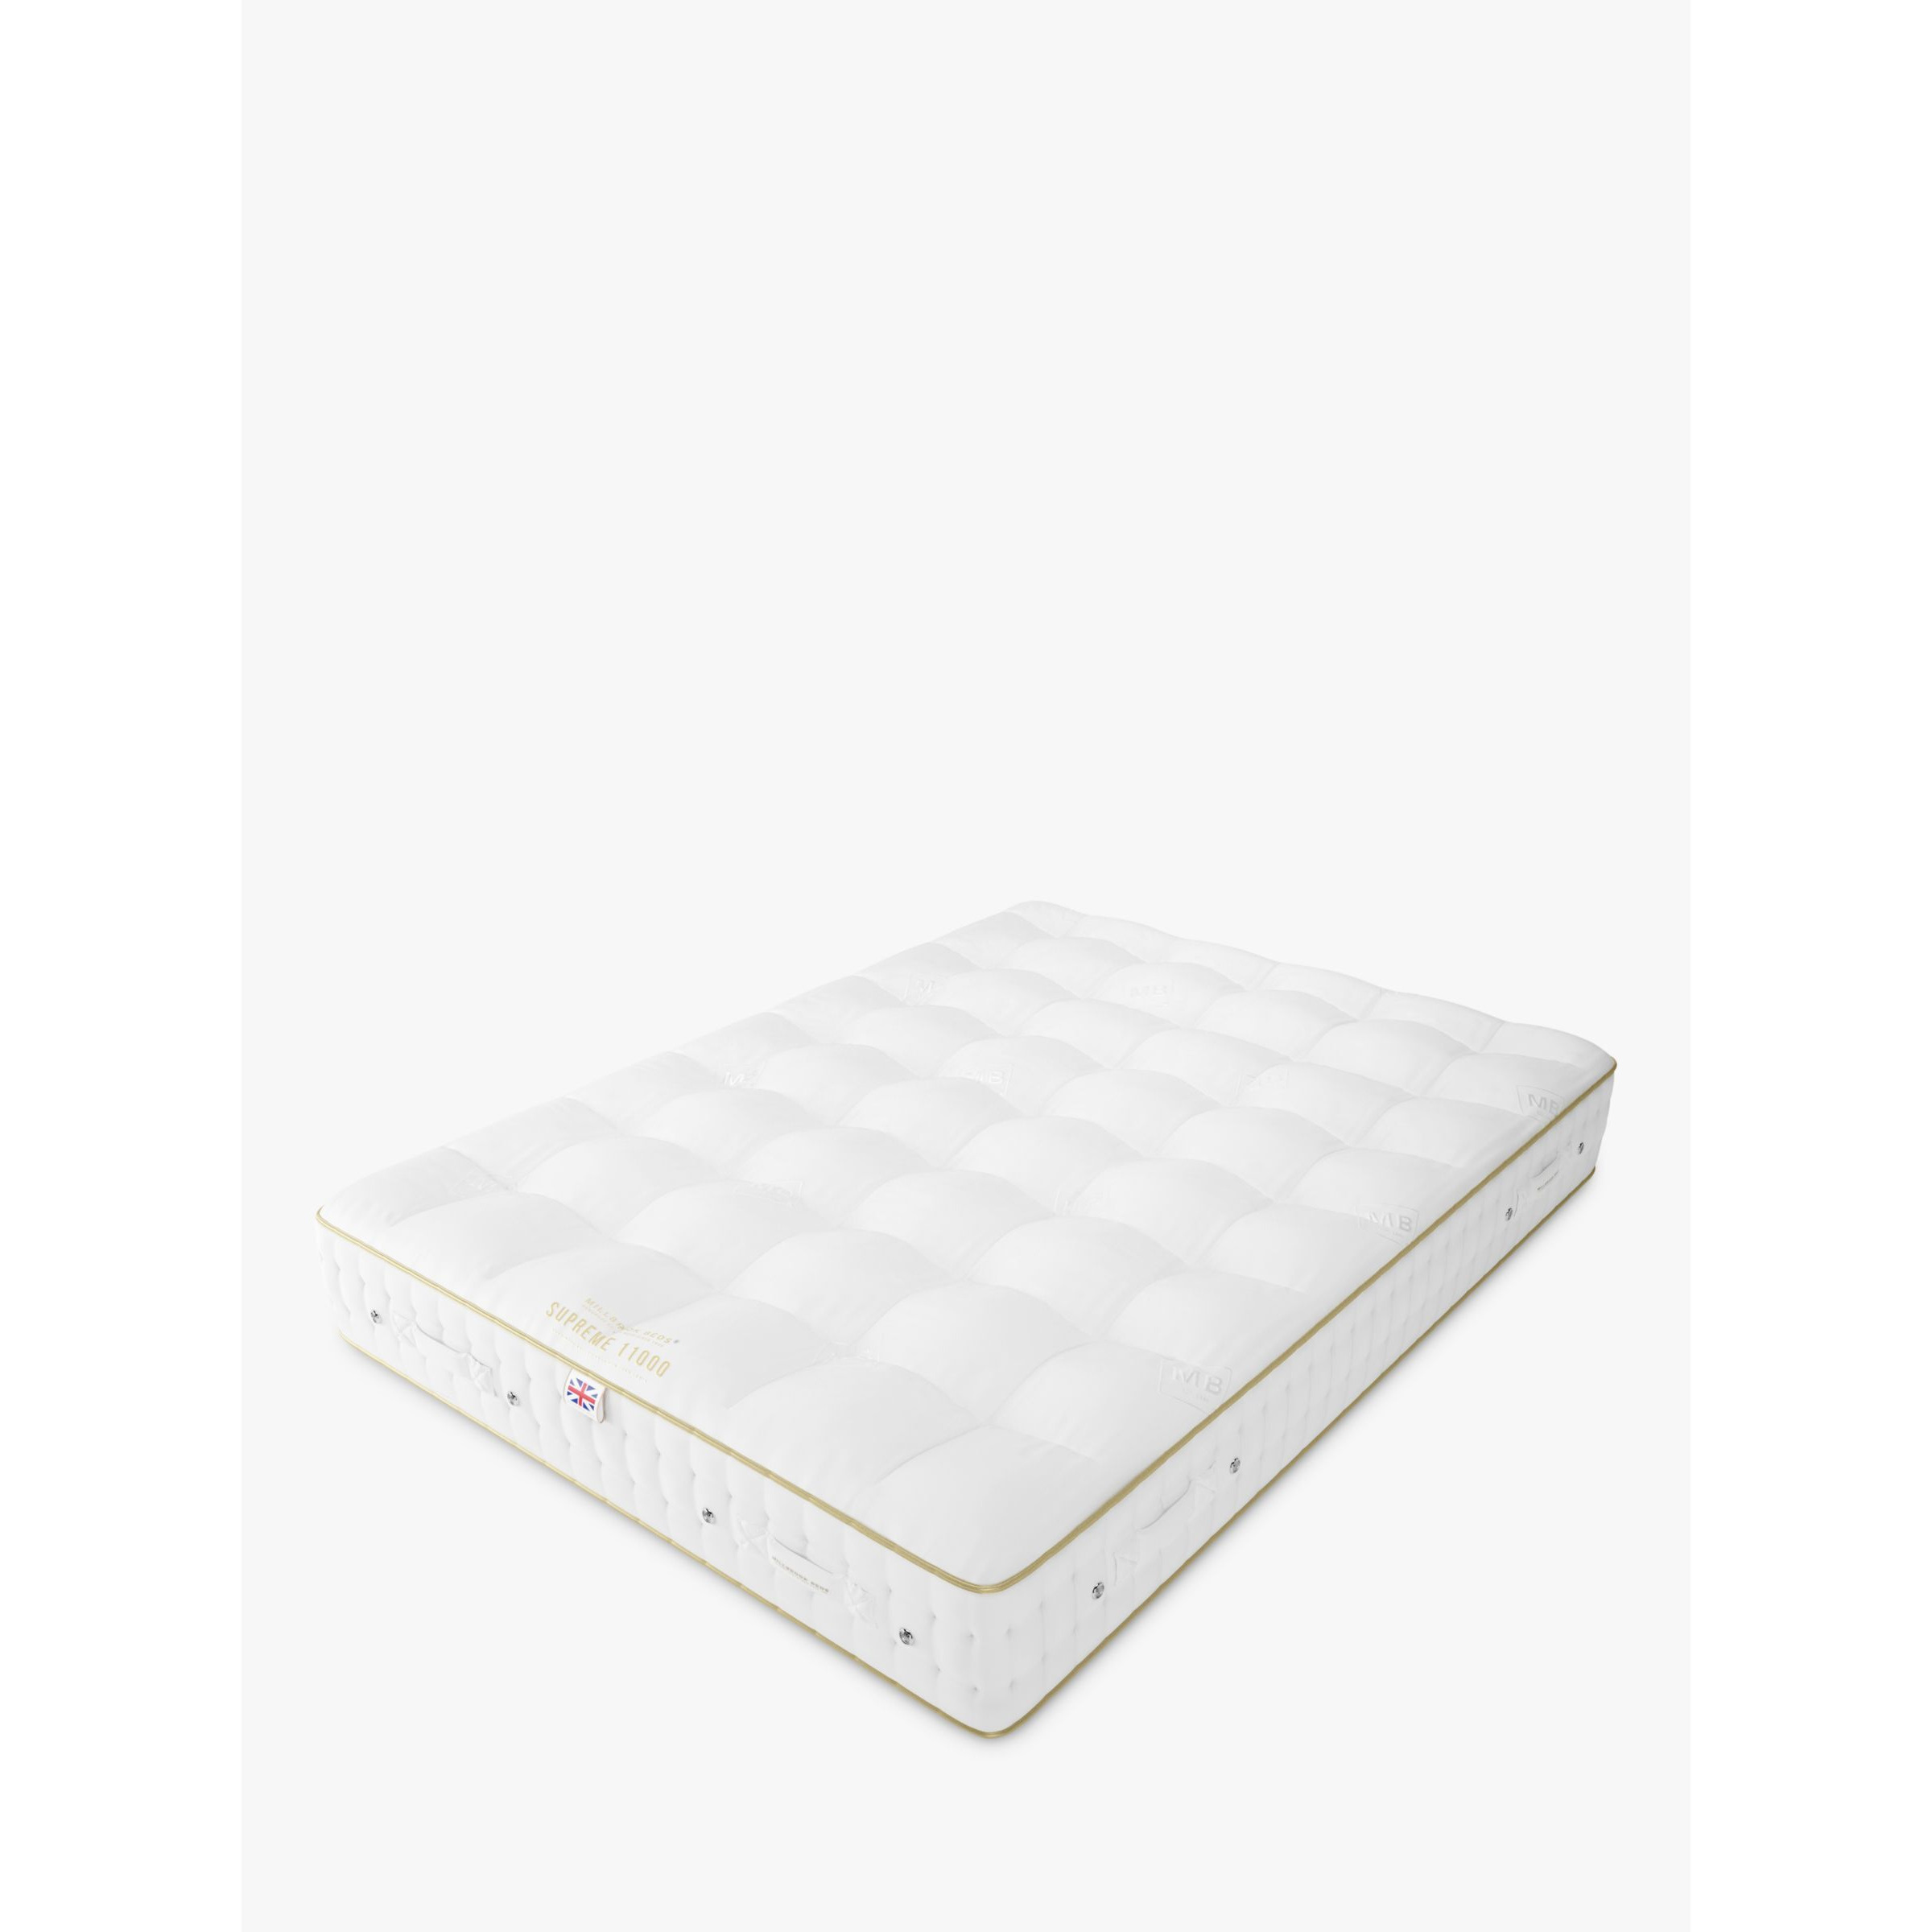 Millbrook Beds Supreme Collection 11000 Zip Link Mattress, Firm Tension, King Size - image 1